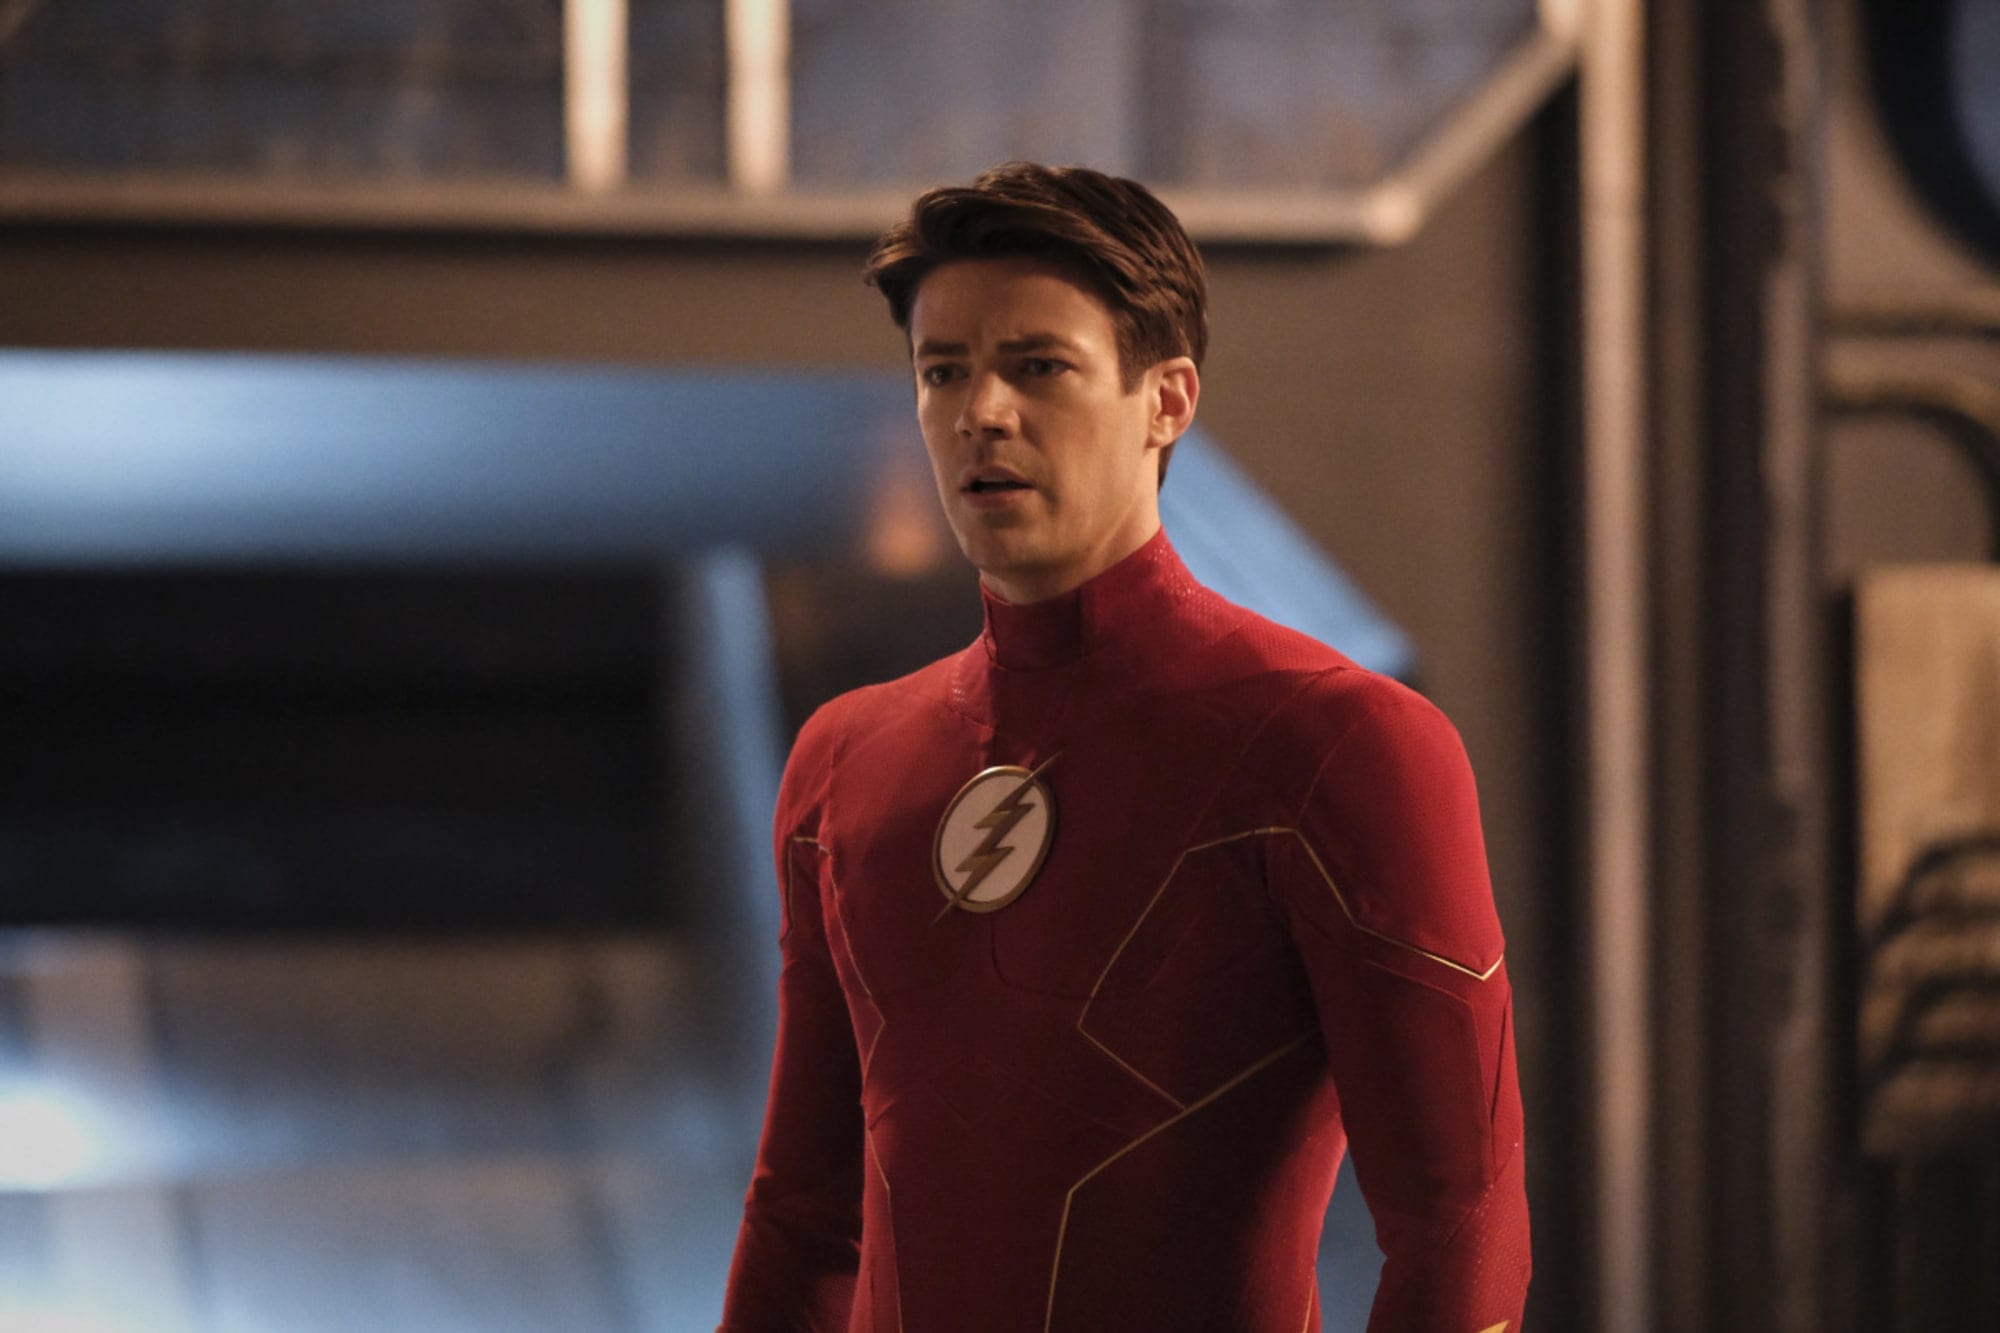 What To Expect From The Flash Season 7 Episode 12?